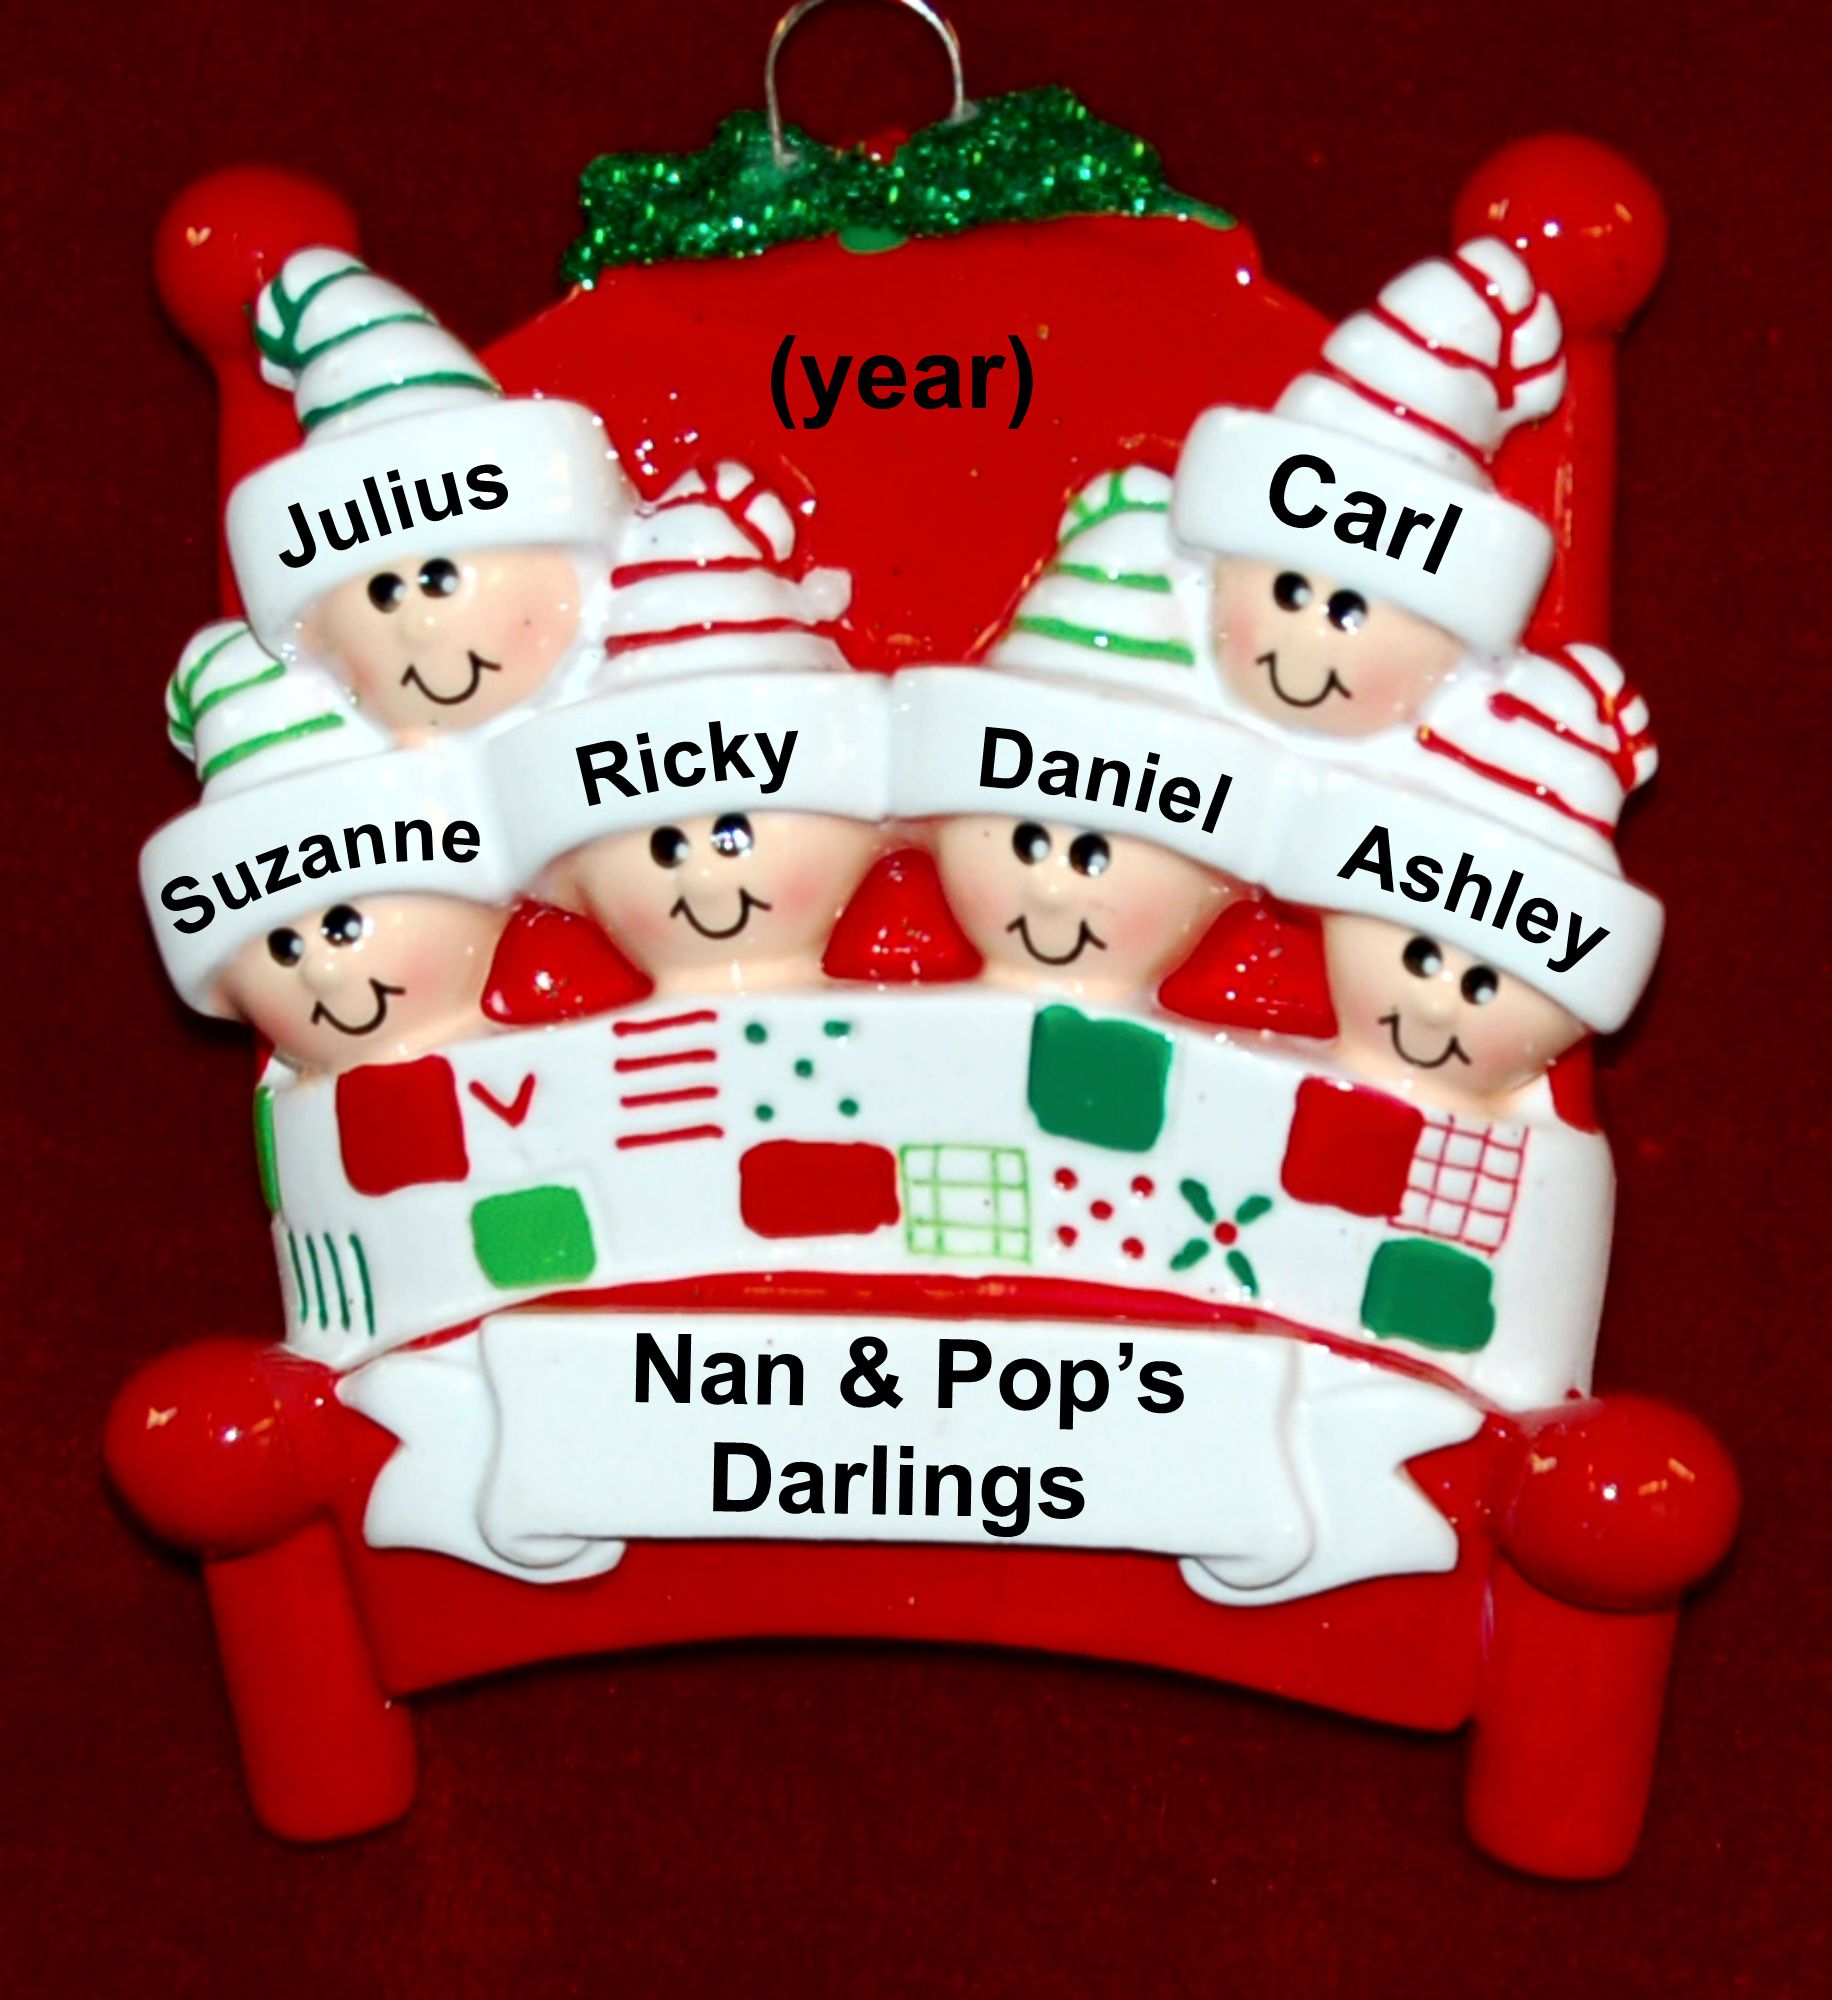 Grandparents Christmas Fun 6 Grandkids Personalized FREE by Russell Rhodes